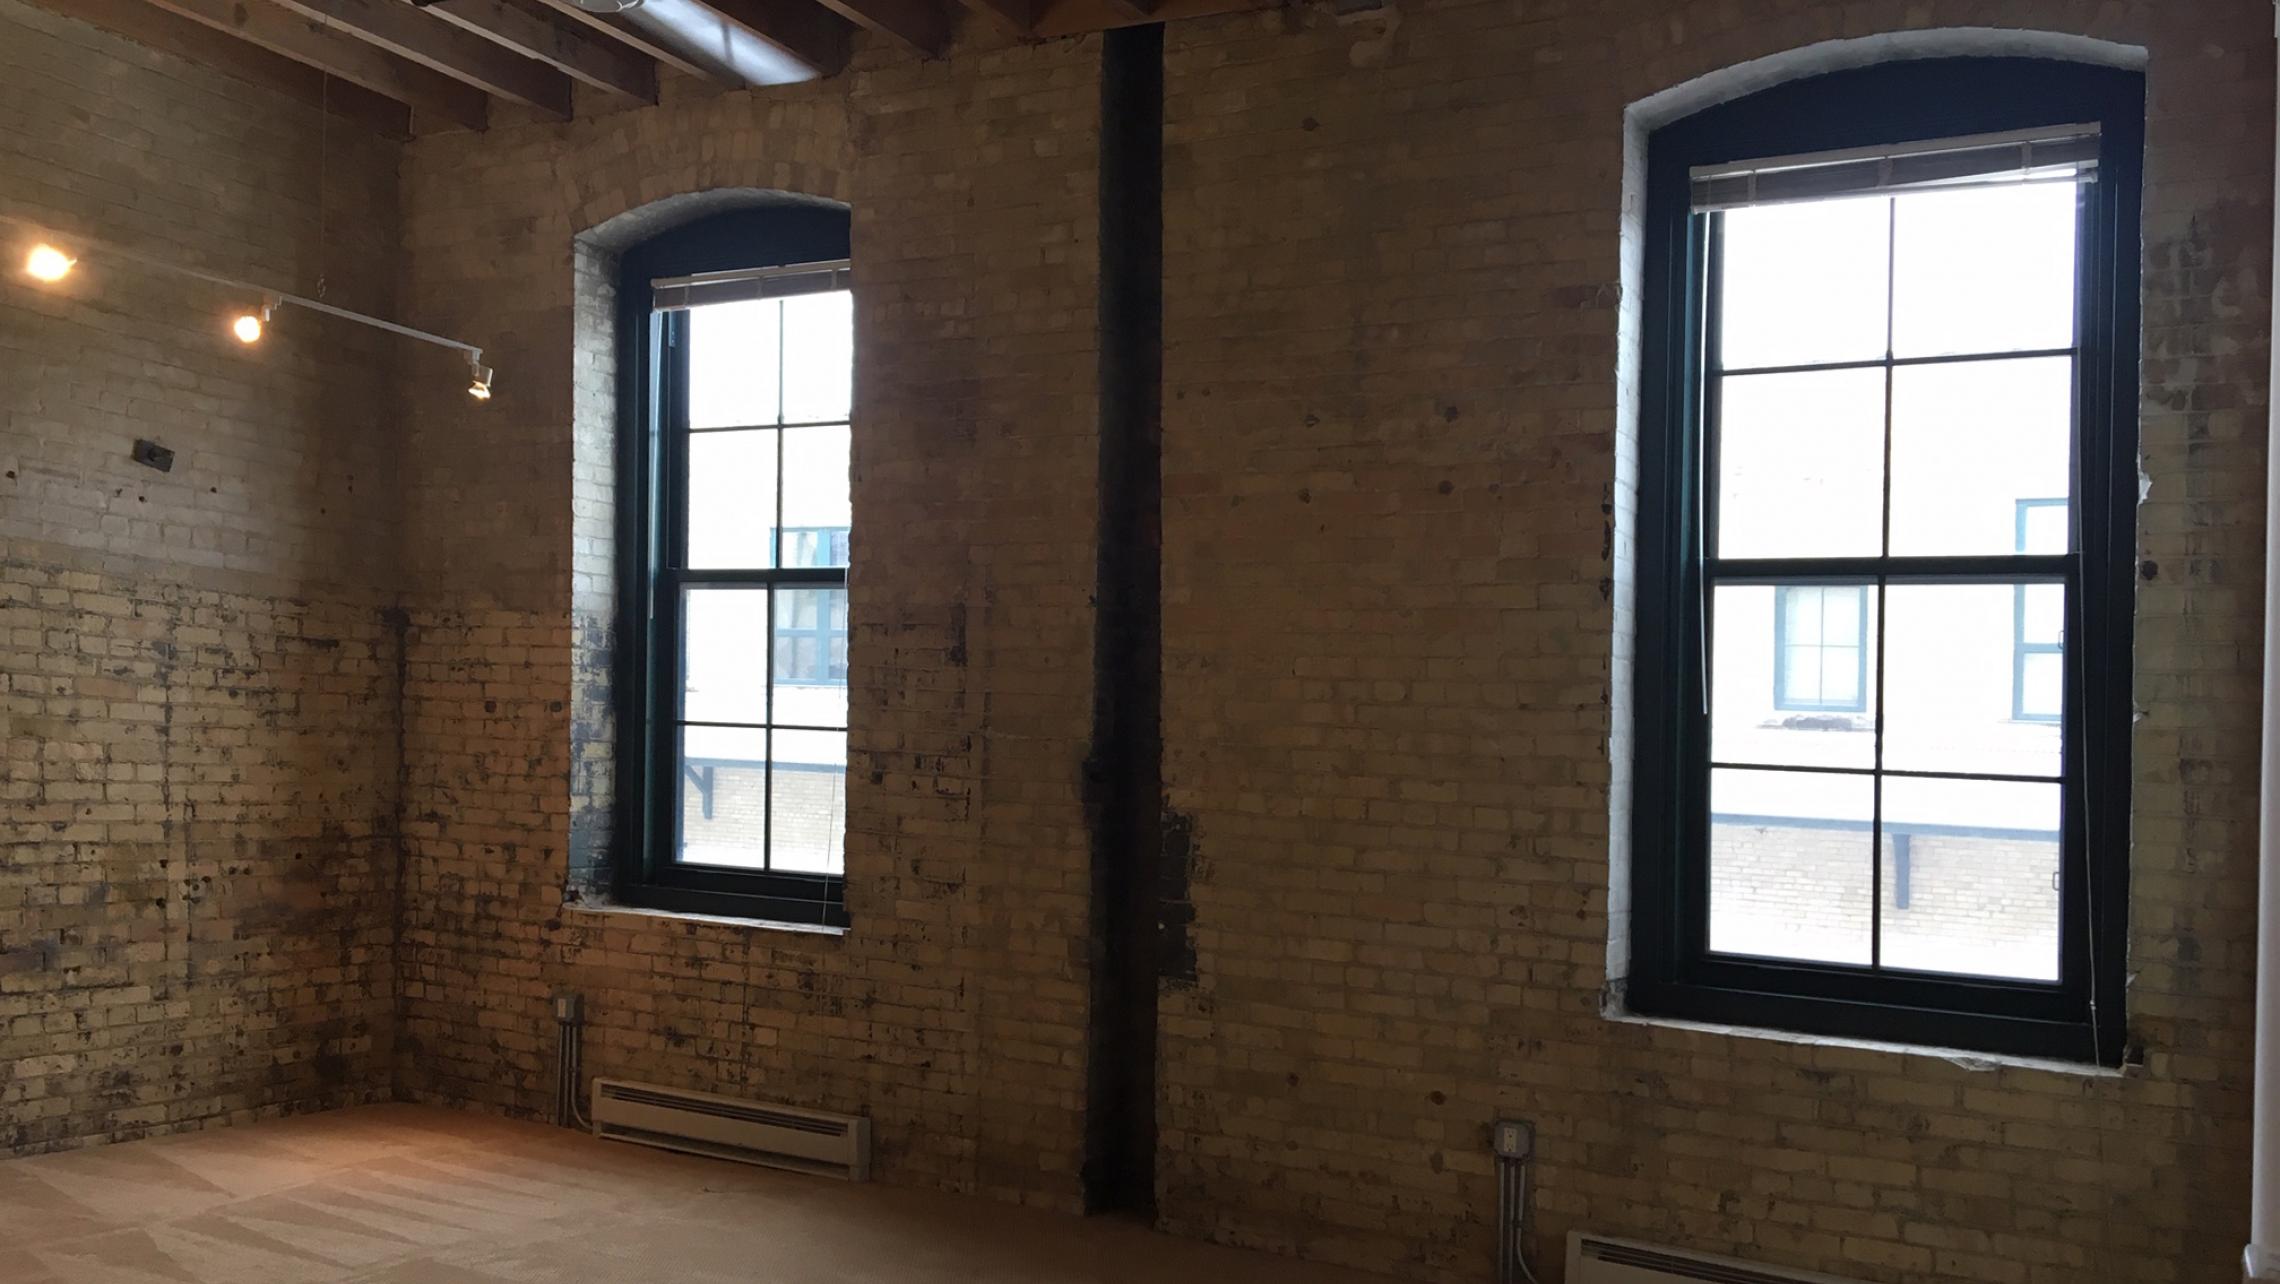 Tobacco-Lofts-At-The-Yards-Apartment-E208-One-Bedroom-Historic-Exposed-Brick-Timber-Unique-Downtown-Madison-Bike-Path-Fitness-Lounge-Courtyard